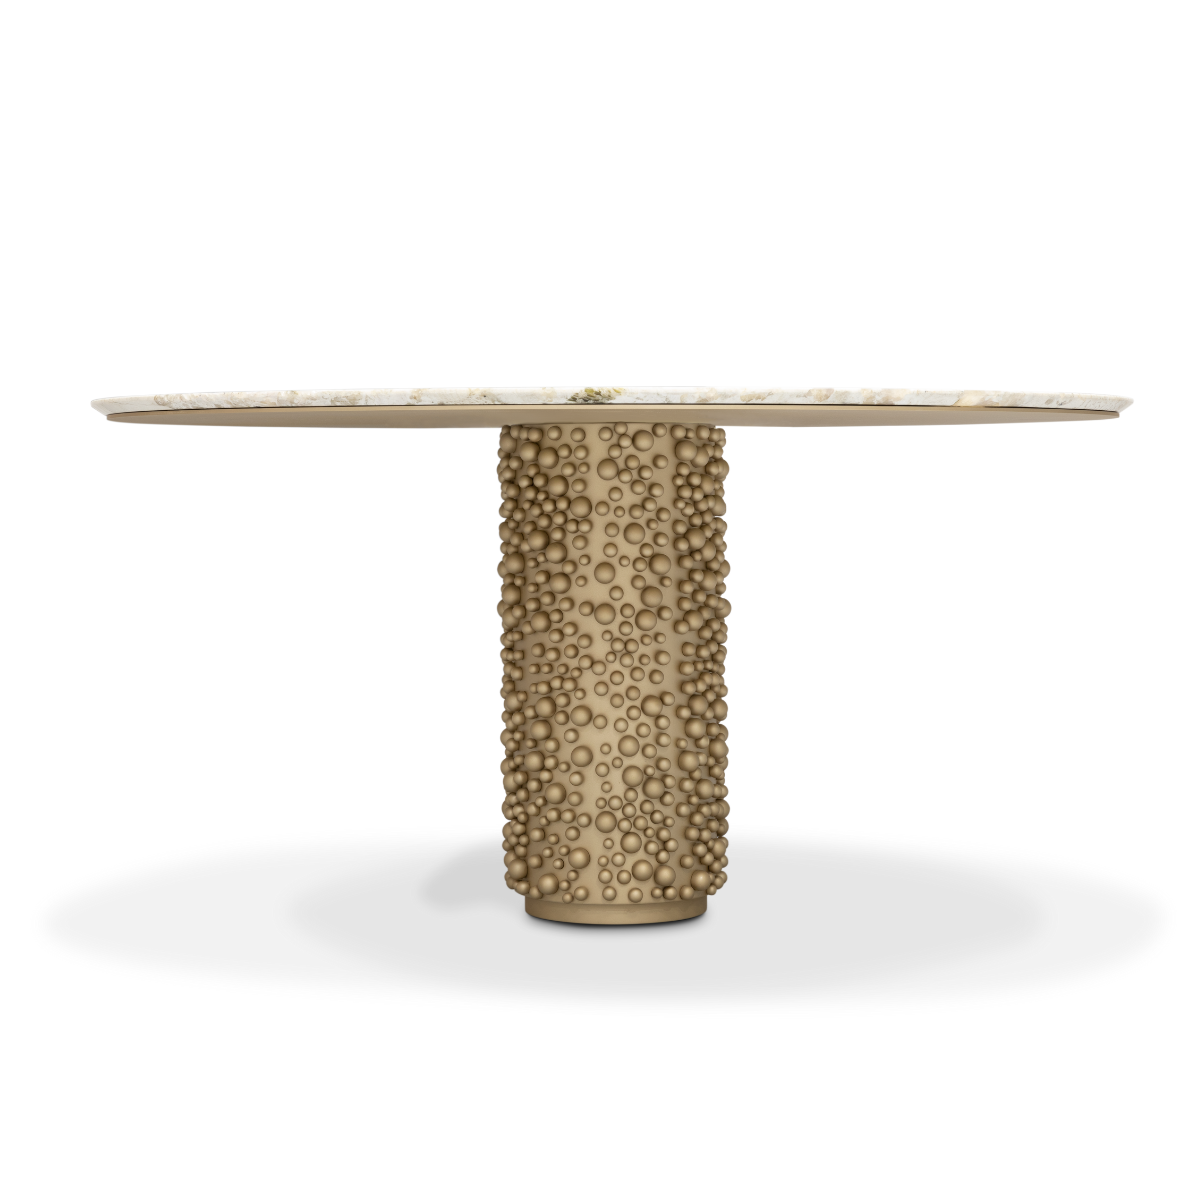 PATAGON DINING TABLE